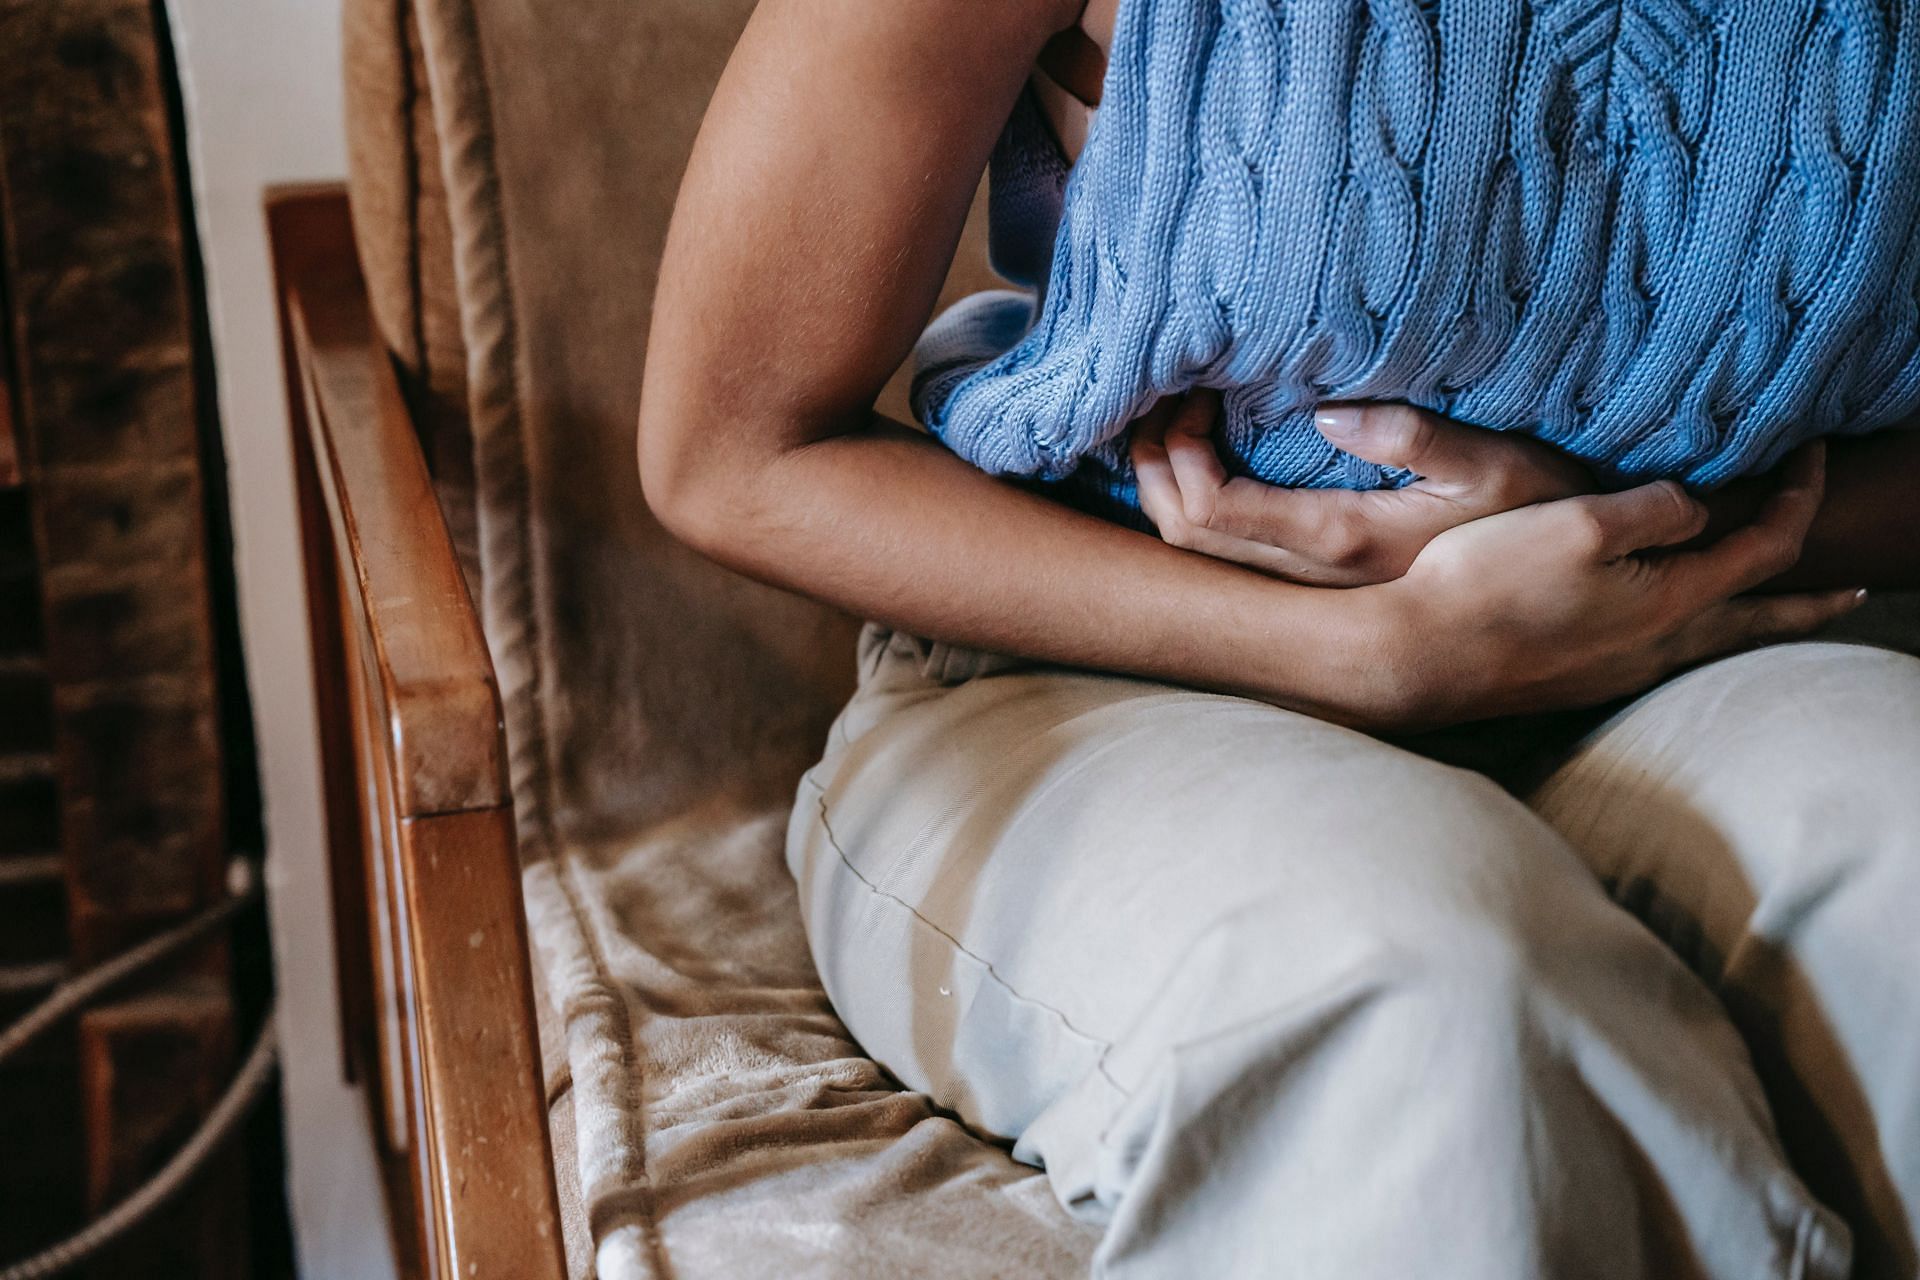 8 home remedies for menstrual cramps (image sourced via Pexels / Photo by sora)